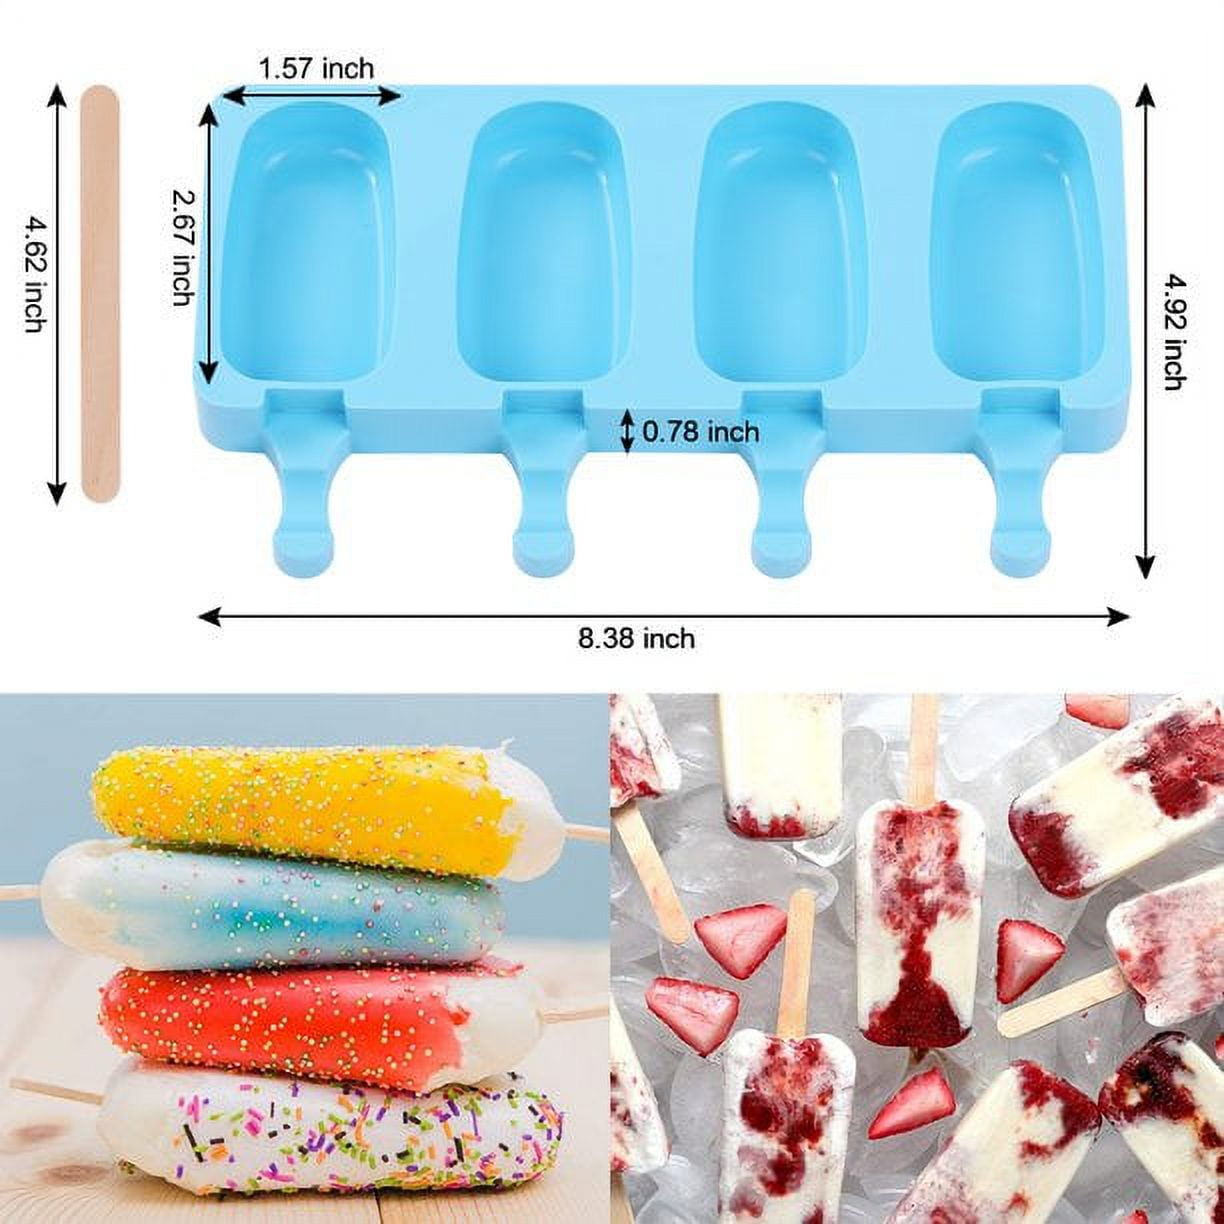 Chainplus Silicone Popsicle Molds 6 Cavity, DIY Popsicle Molds for